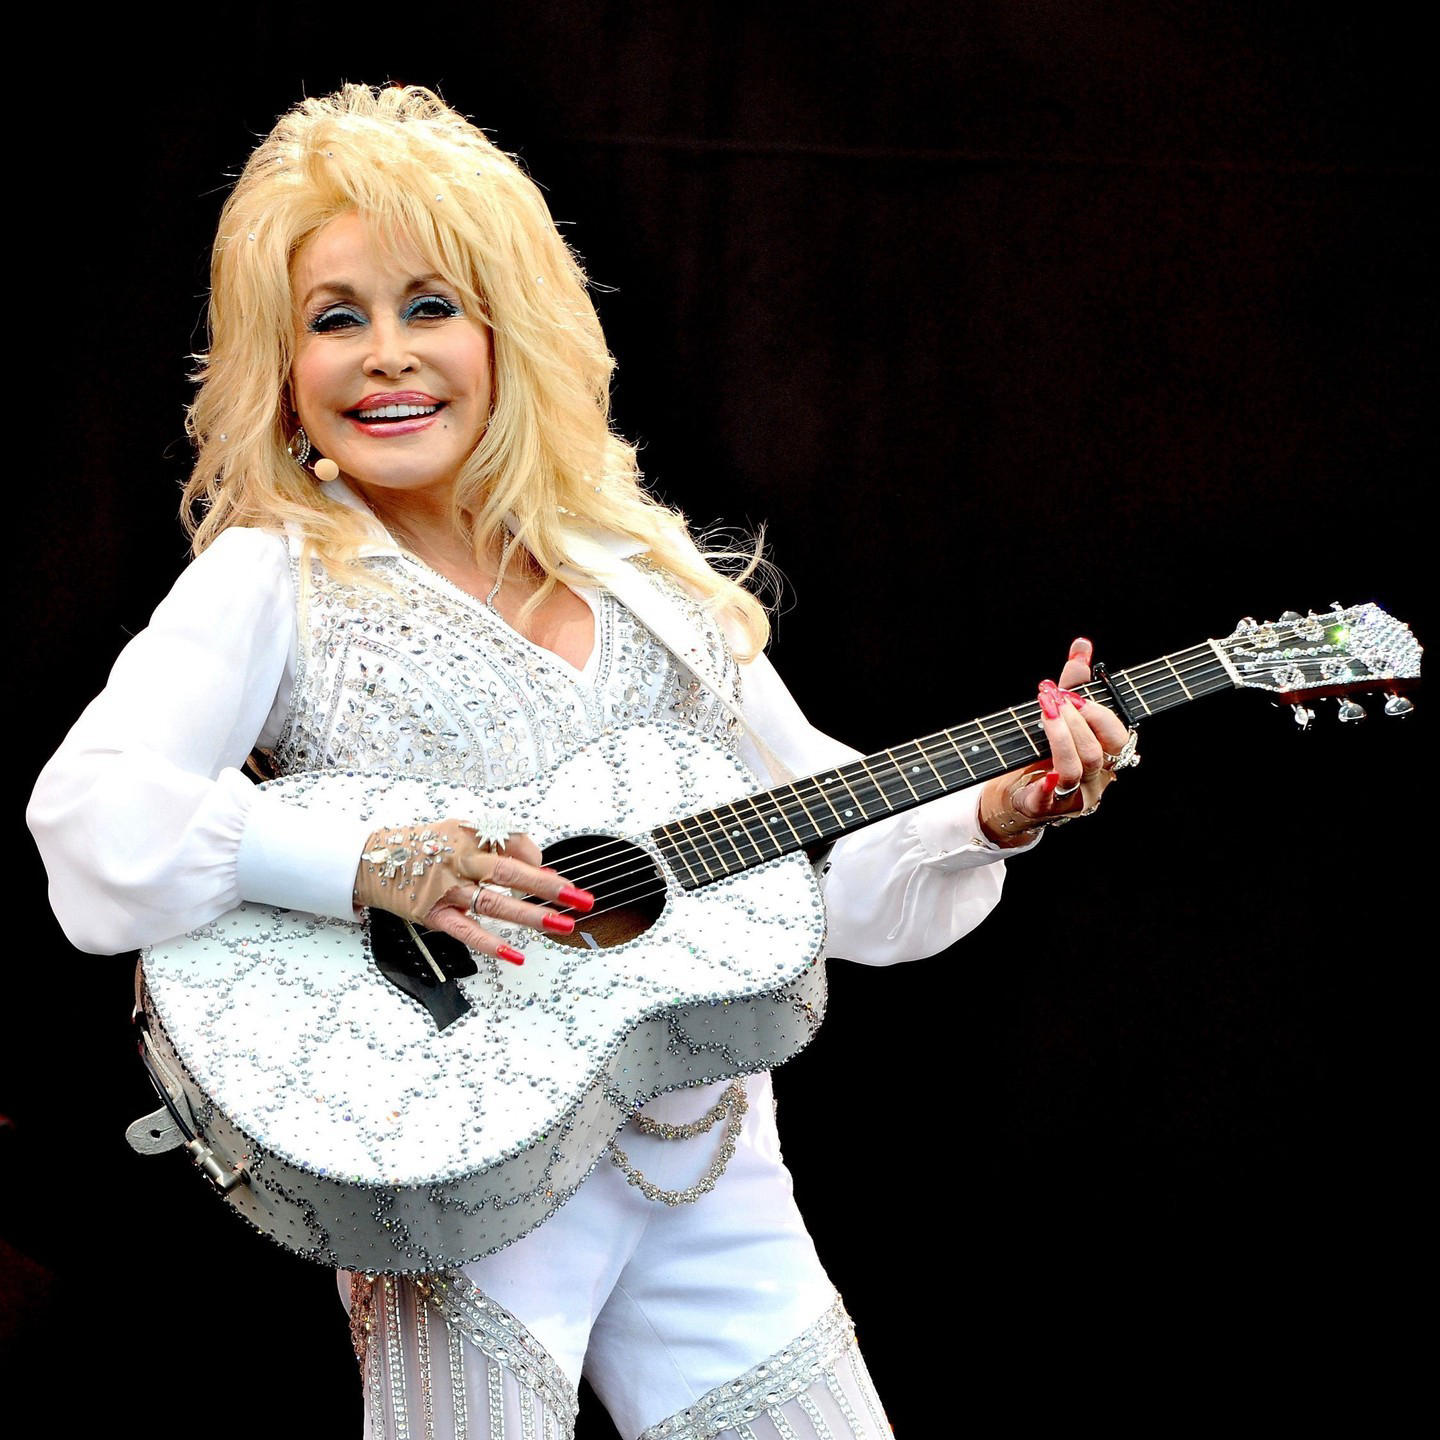 image  1 Vanities - Dolly Parton didn't mean to “stir up any controversy” with her recent entrée into the Roc